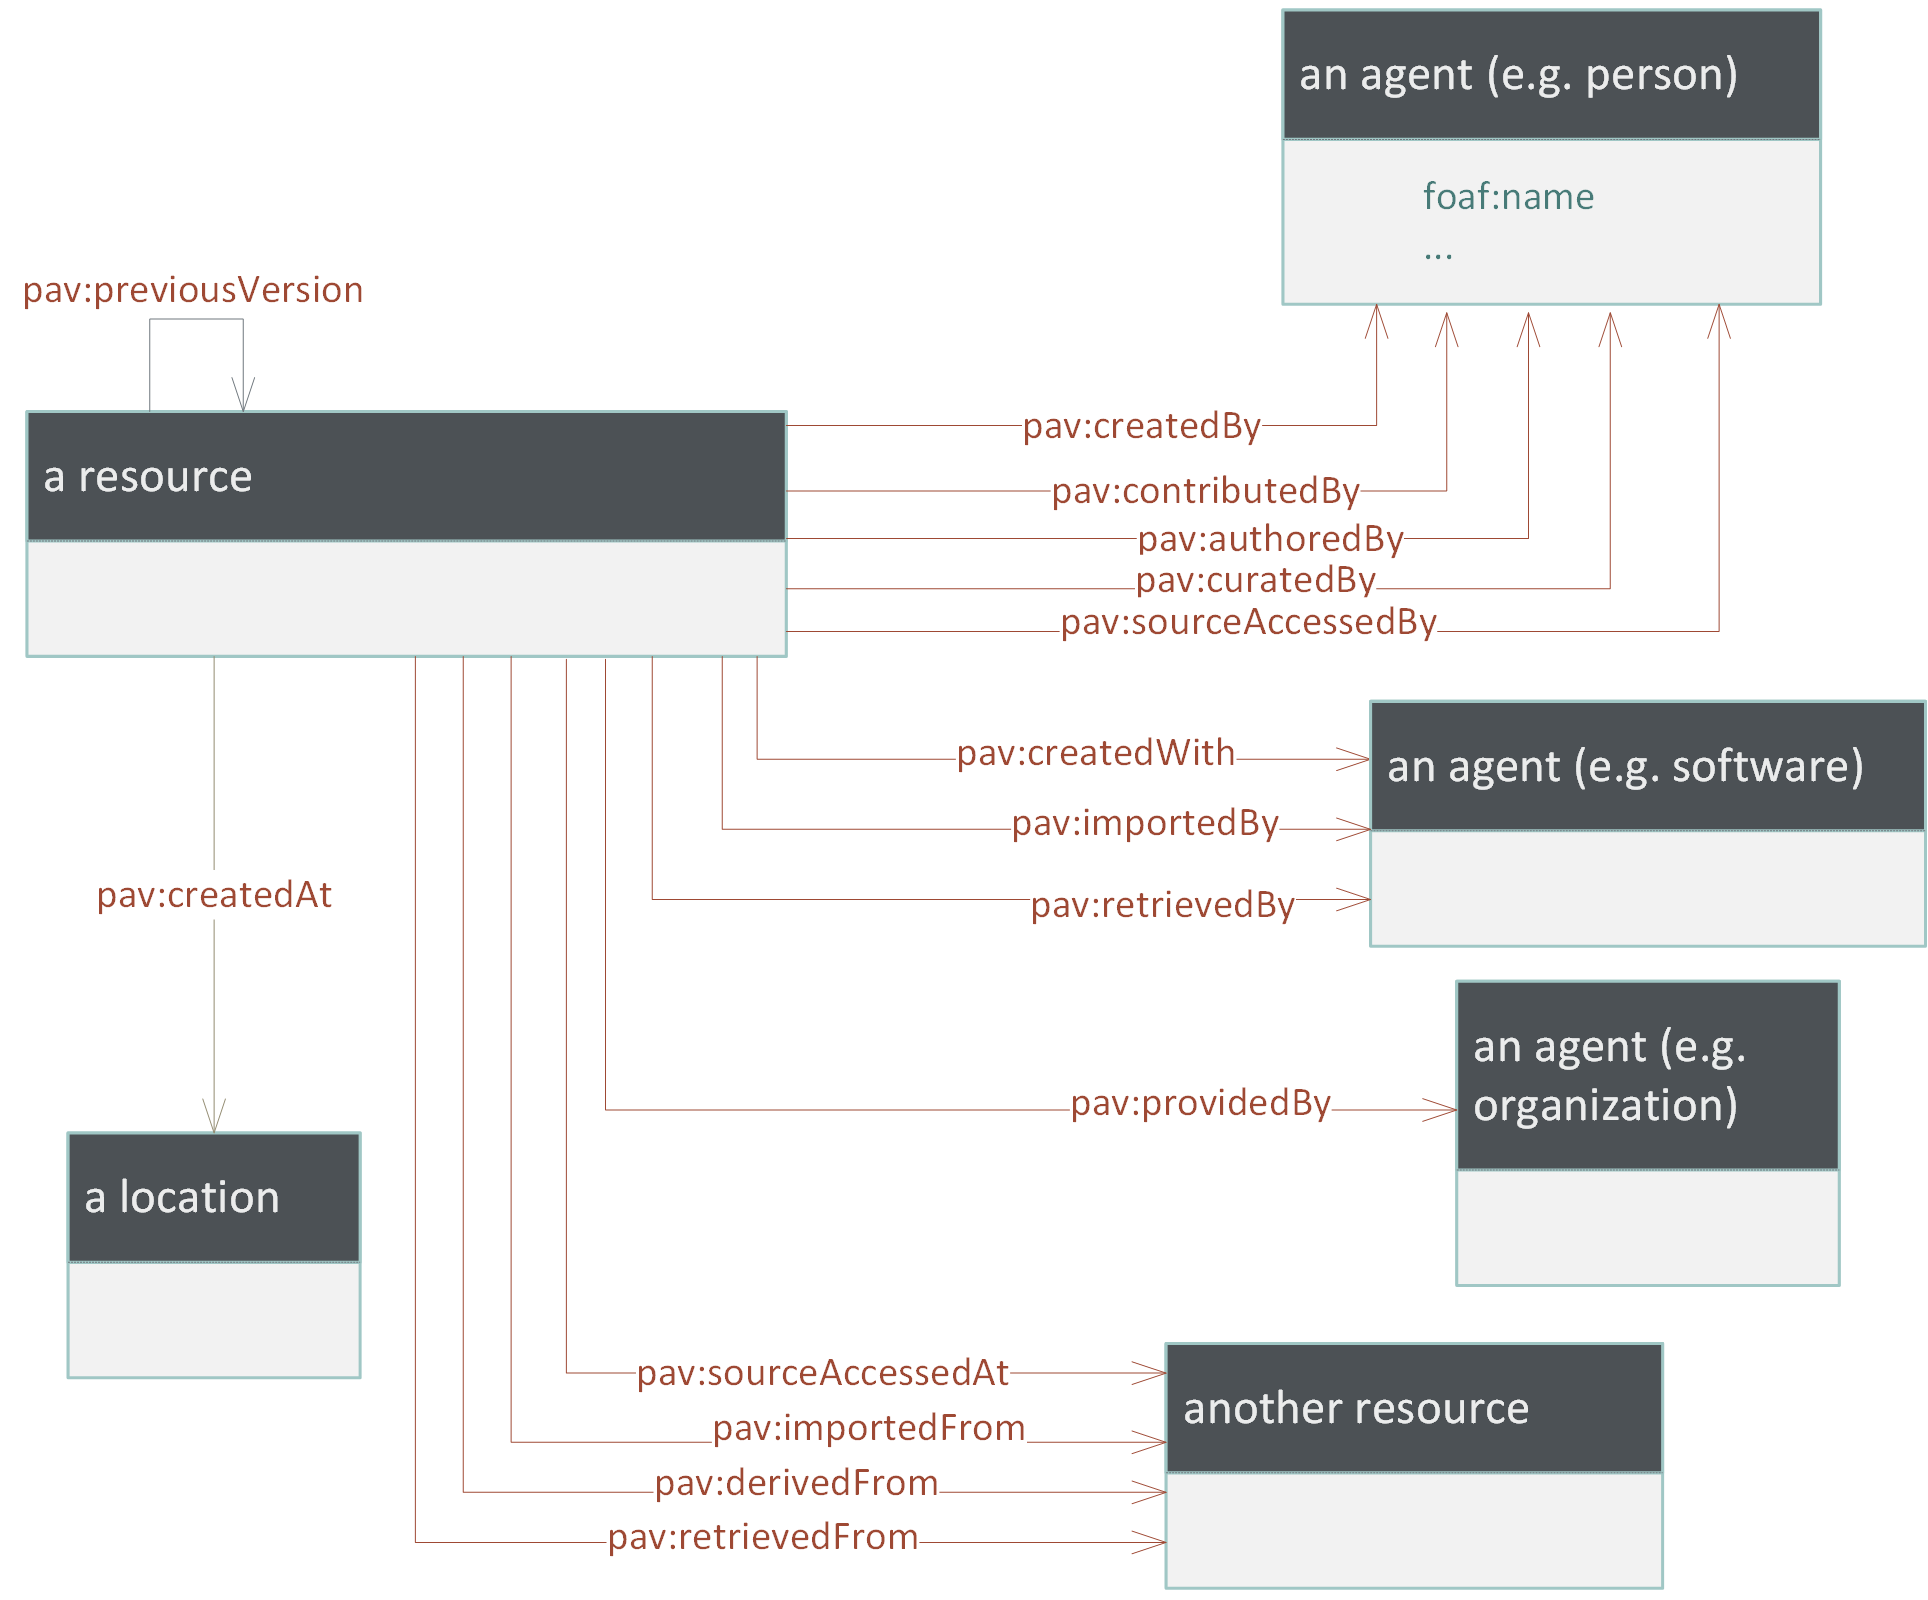 Diagram overview of PAV: a resource has pav attributes like createdBy, contributedBy to Person agents. From the resource,createdWith, retrievedBy etc. go to Software agents, and providedBy to Organization agents. createdAt goes to a Location, and sourceAccessedAt, derivedFrom, retrievedFrom to another resource